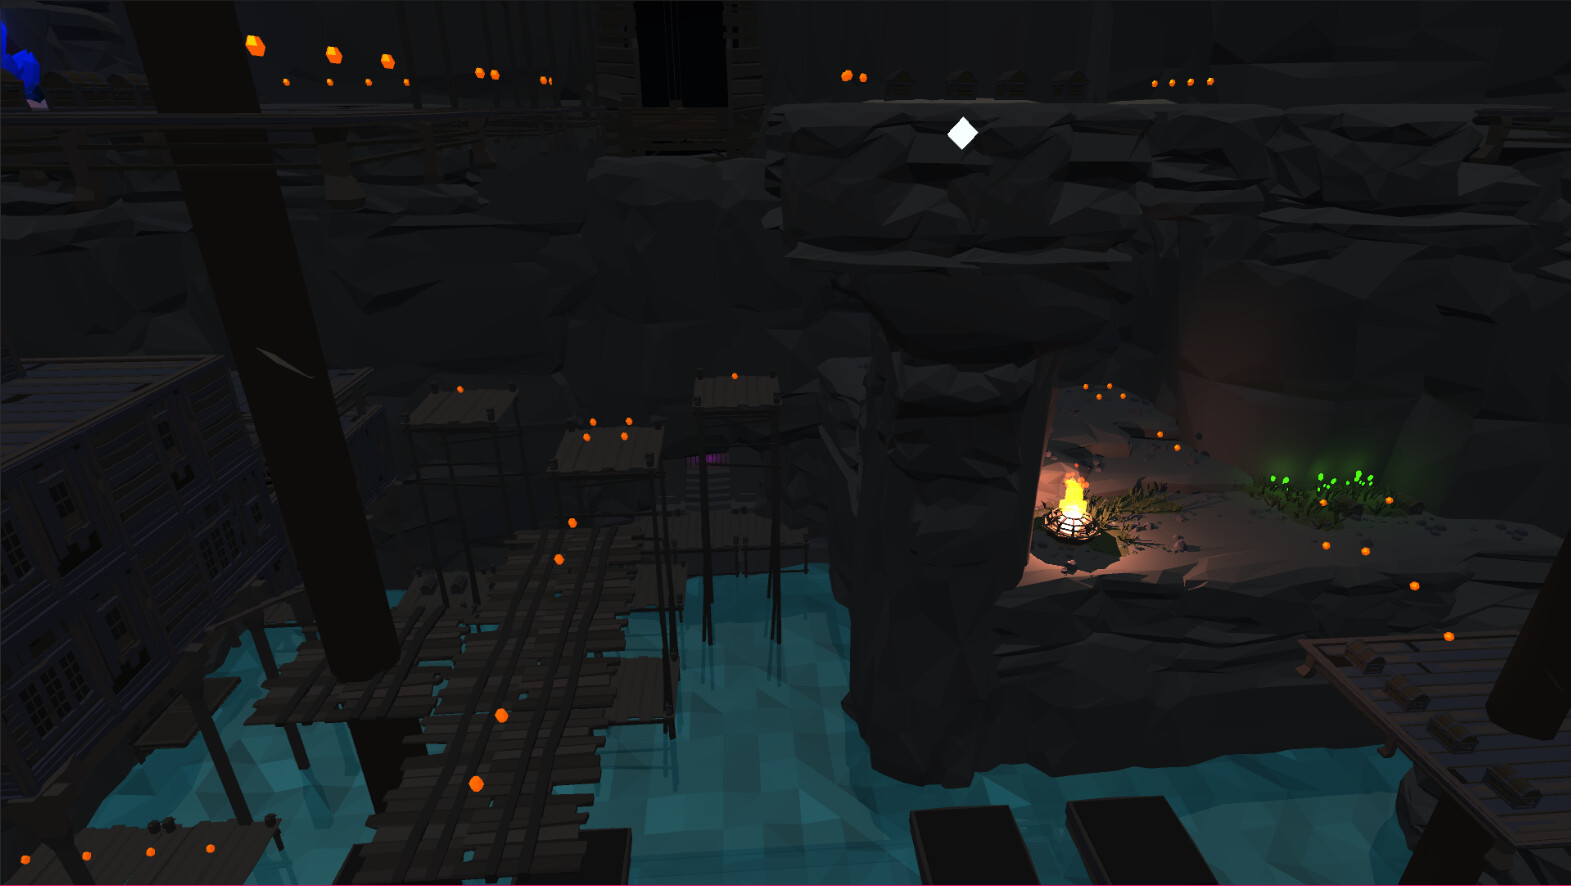 The player moves around the perimeter of the mines to continue upwards. 